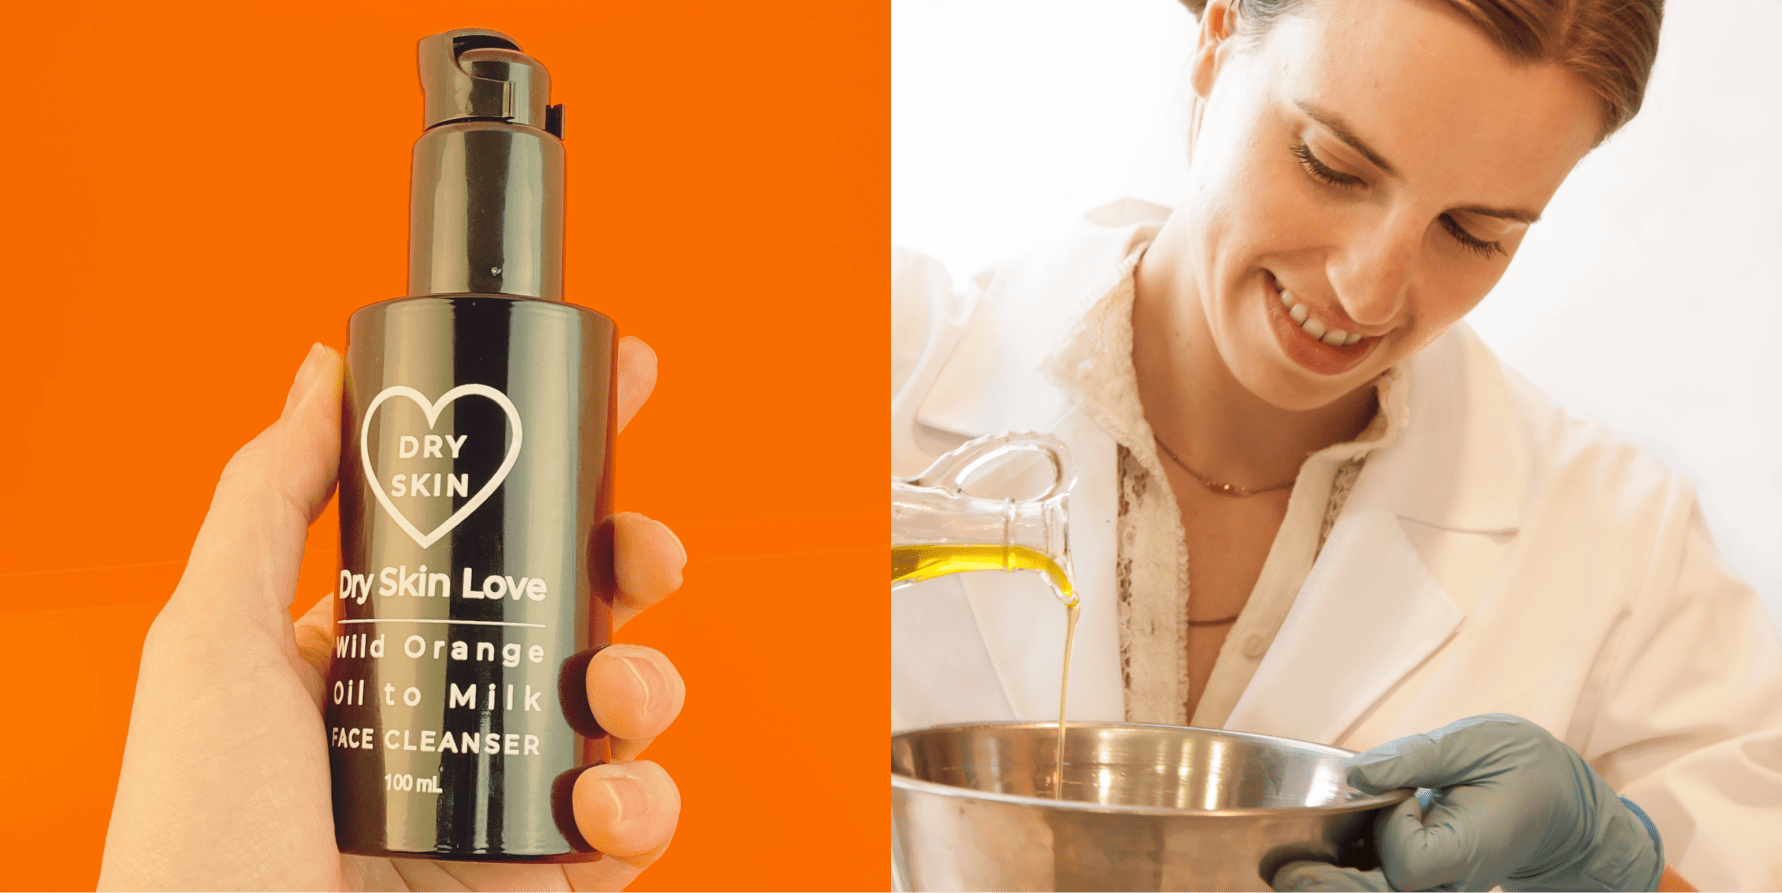 A hand holds a bottle of Dry Skin Love’s Wild Orange Oil to Milk Face Cleanser. A woman in a lab coat and gloves pours oil into a stainless steel bowl.